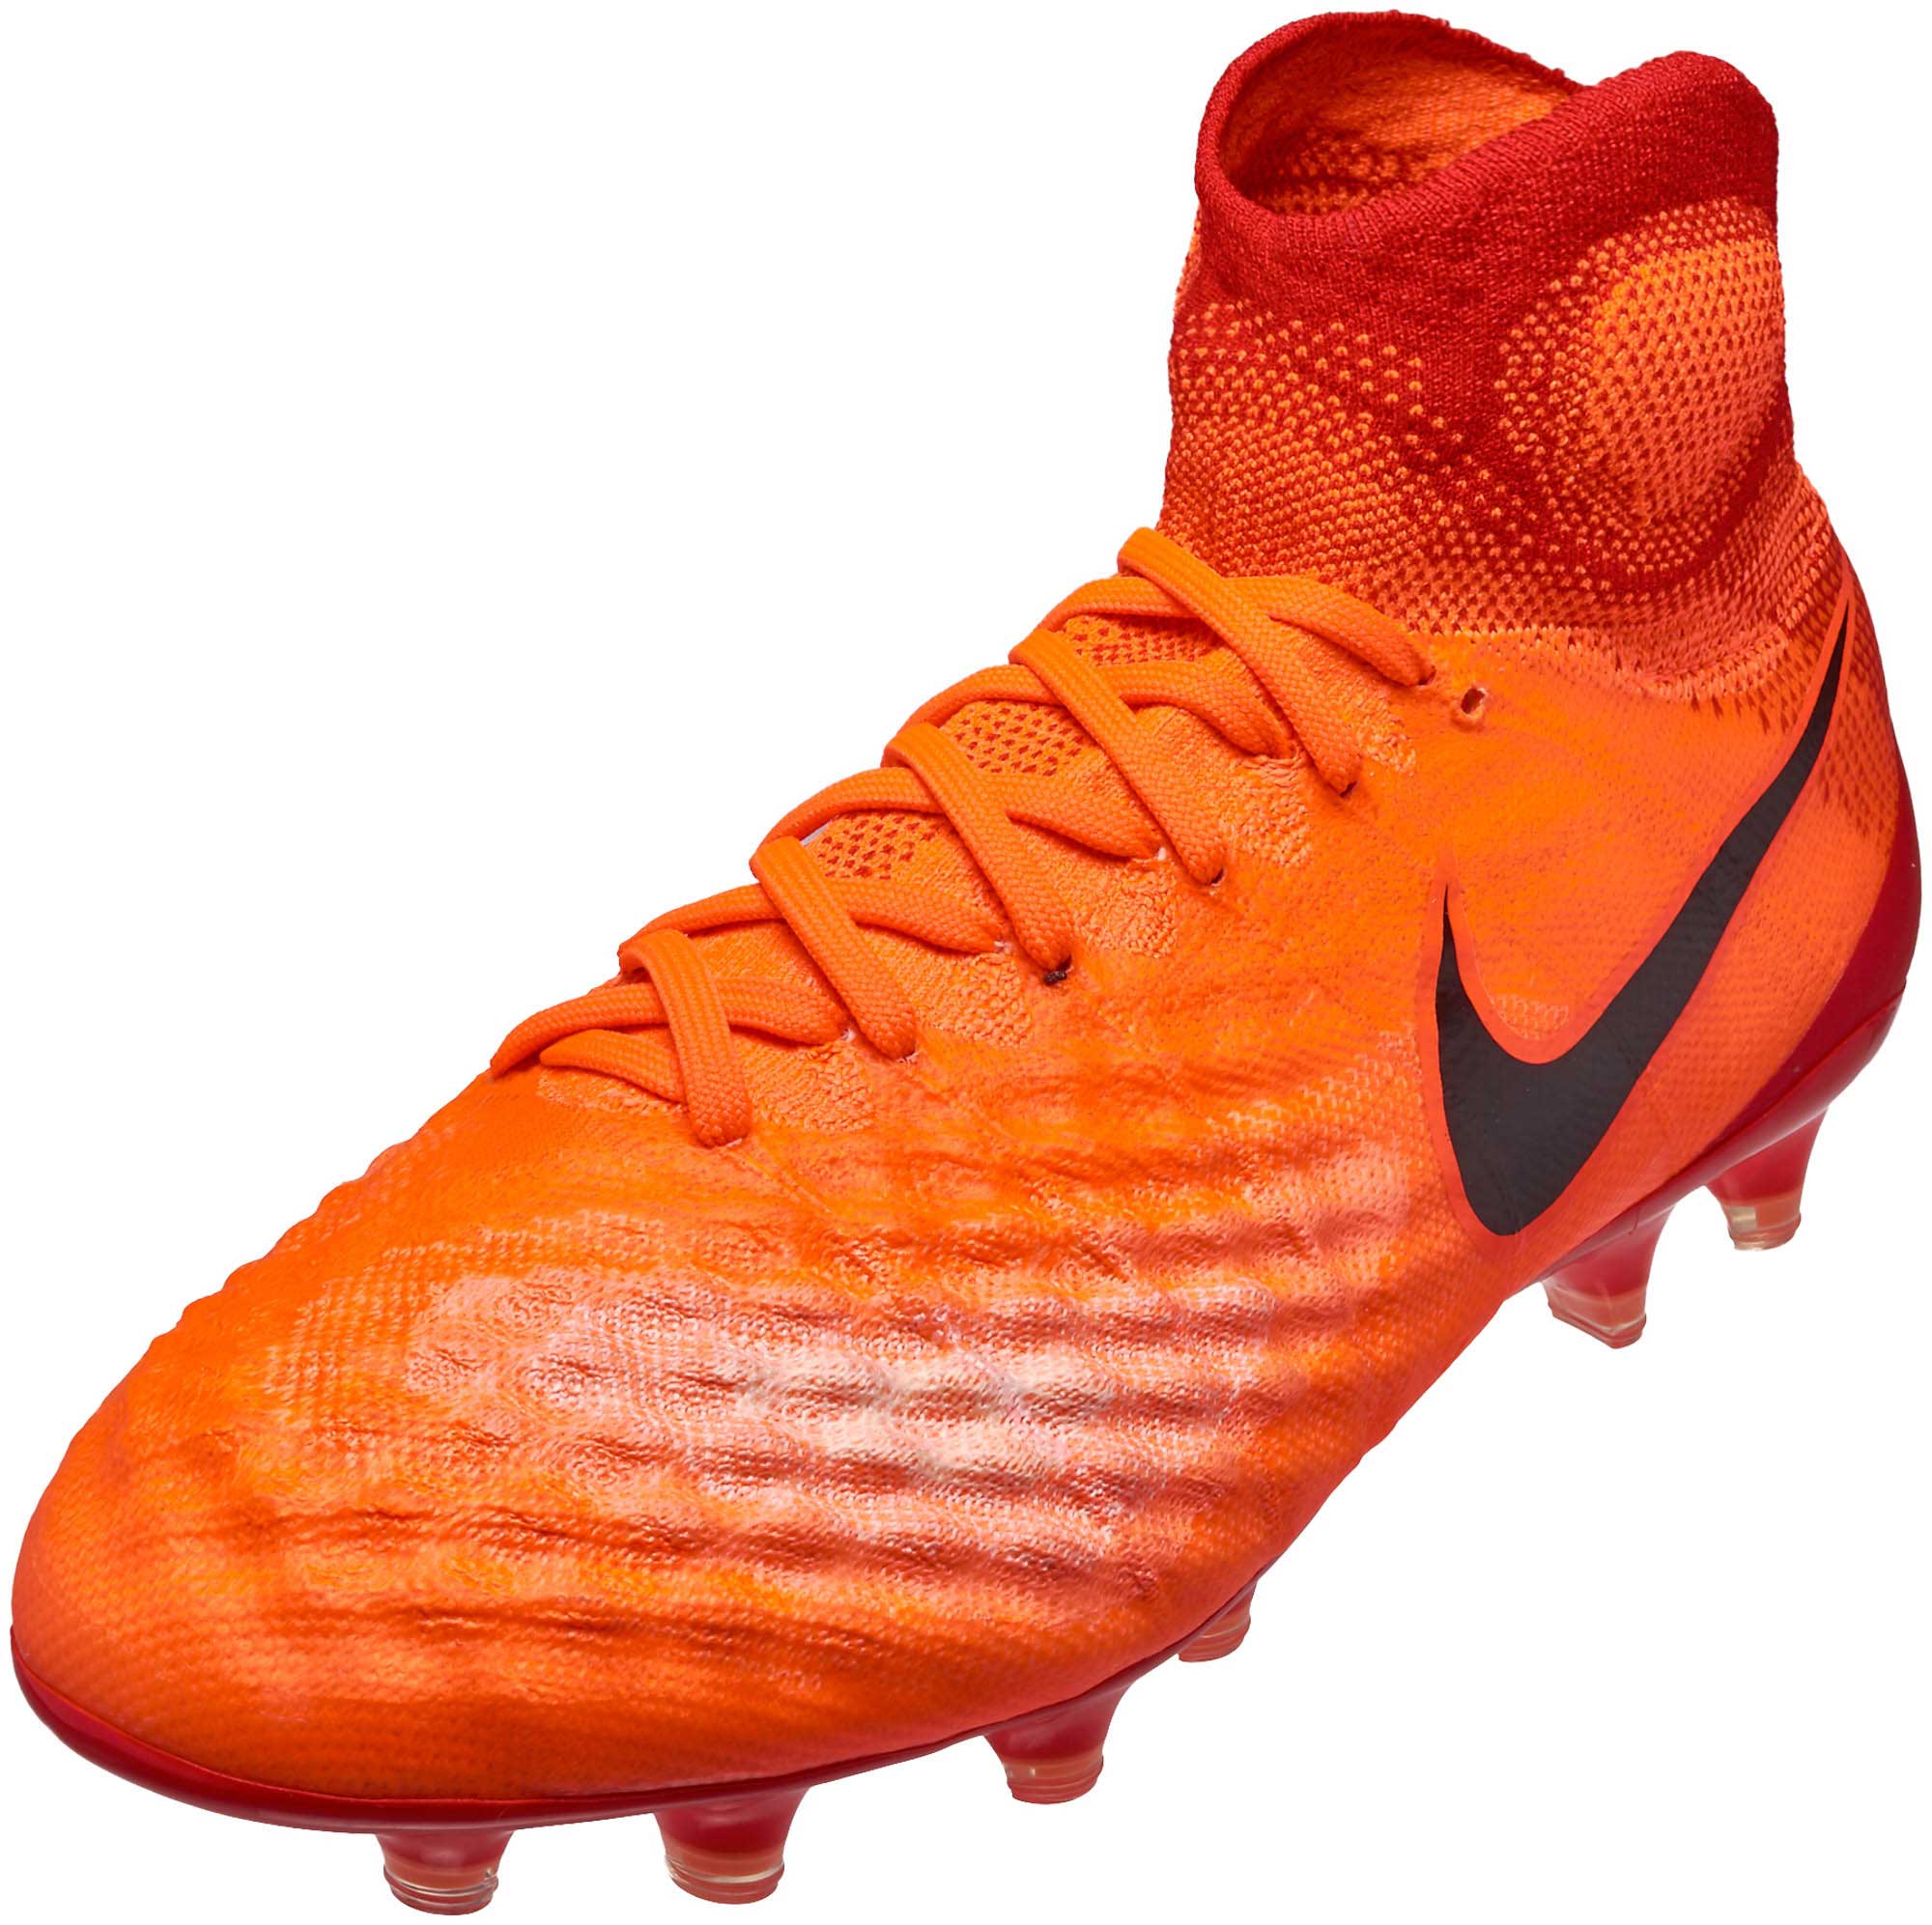 Nike MagistaX Proximo IC Indoor Soccer Shoes